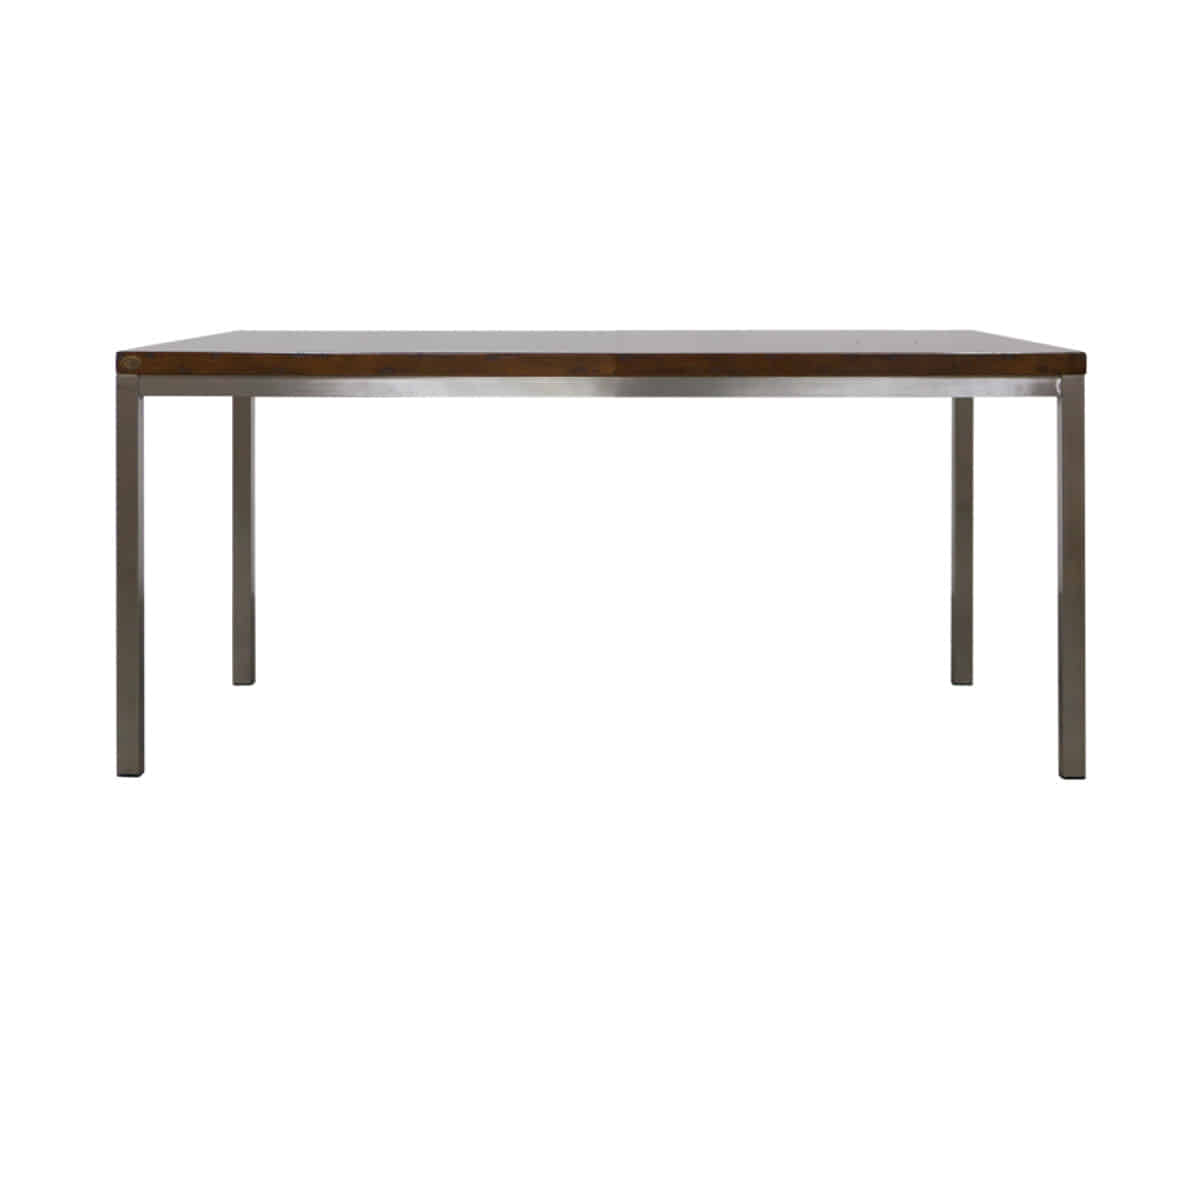 BUSATTO Steel Dining Table 부사토 식탁 - 190MADE IN ITALY